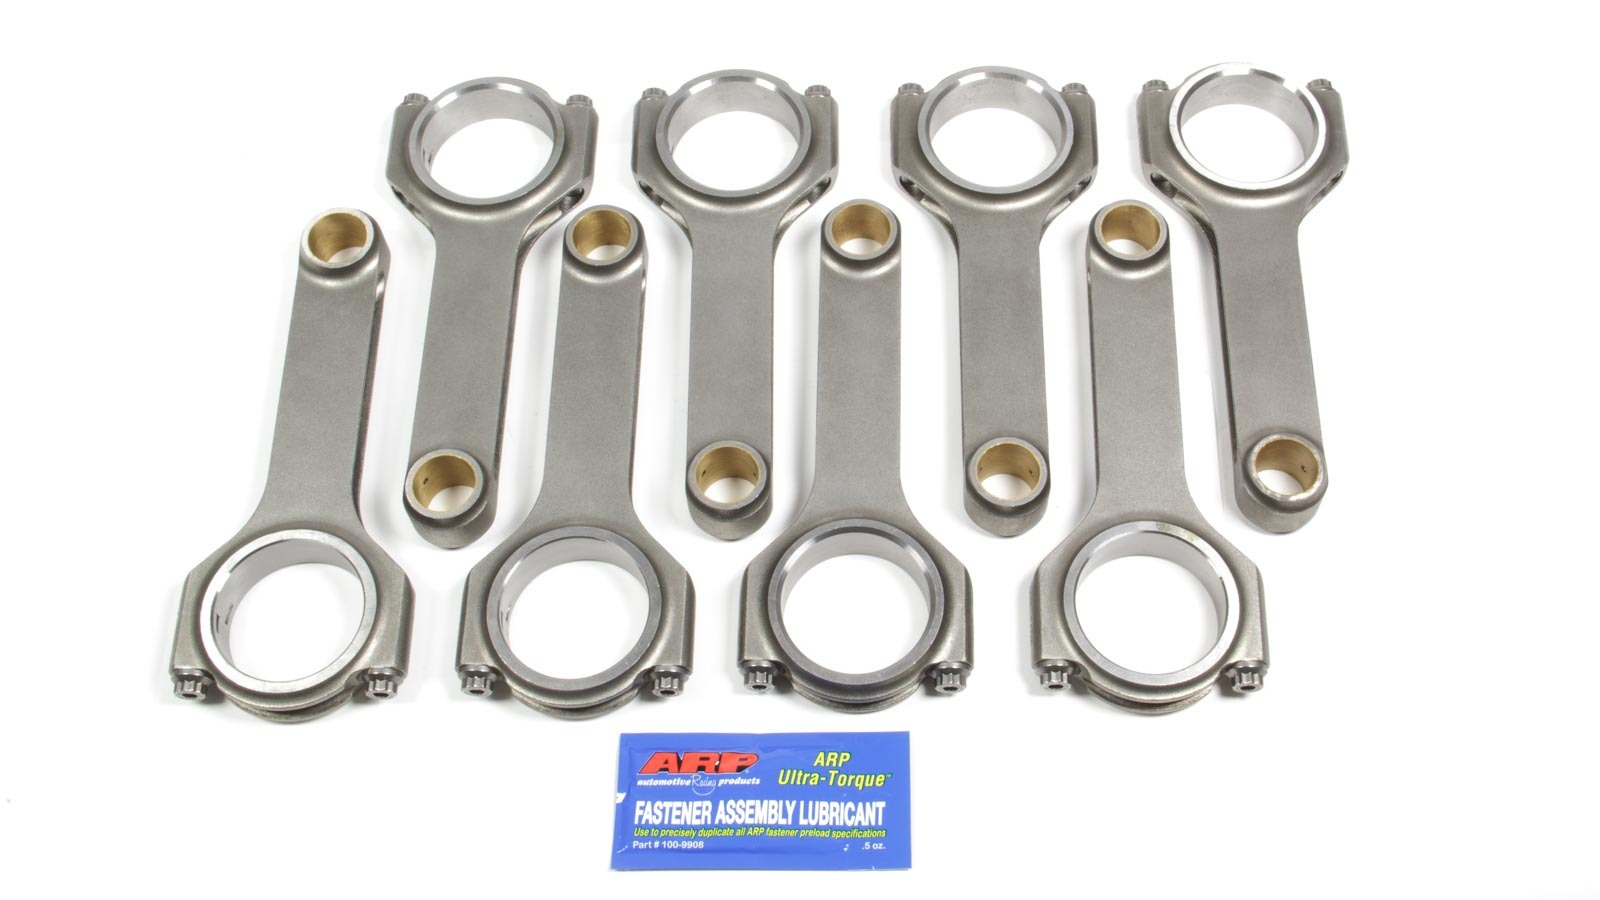 Scat 2-454-6700-2200A - Connecting Rod, H Beam, 6.700 in Long, Bushed, 7/16 in Cap Screws, ARP2000, Forged Steel, Big Block Chevy, Set of 8